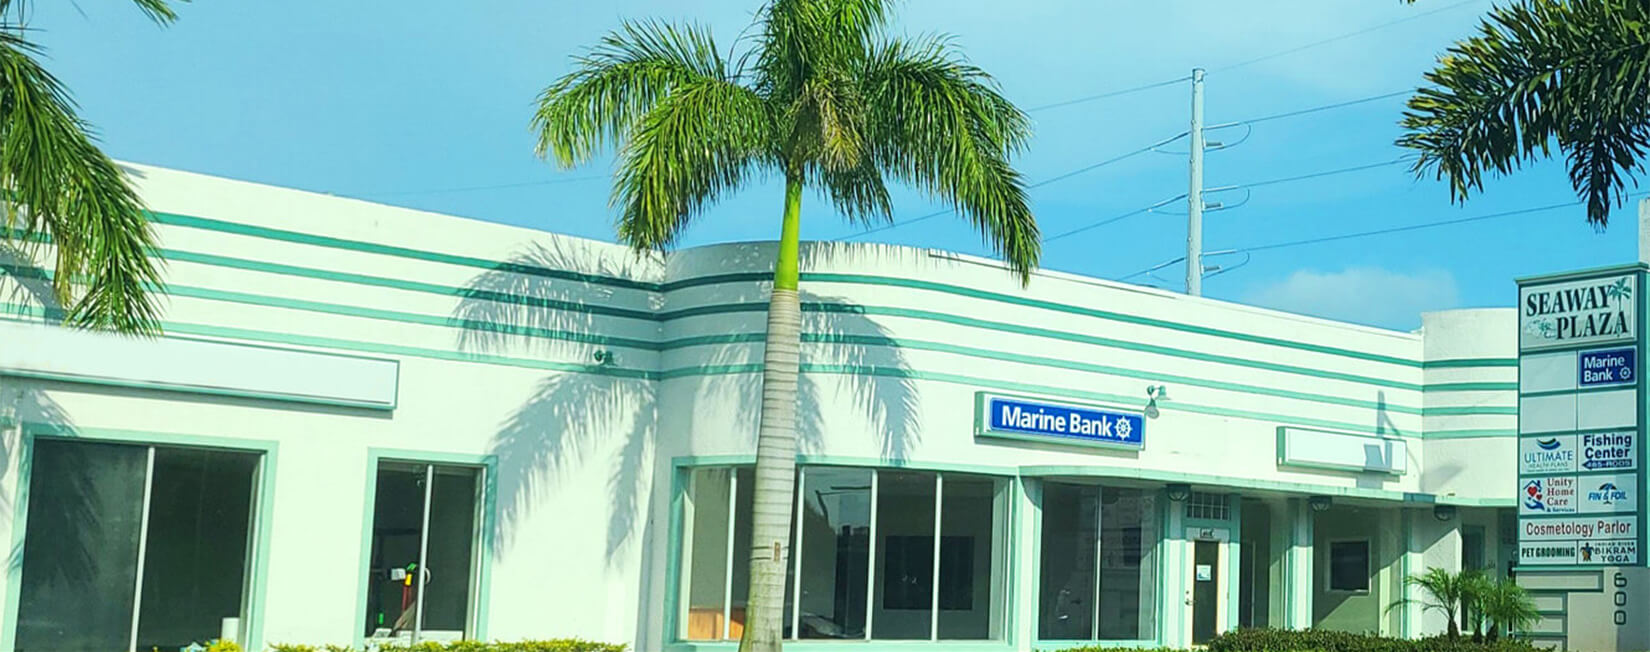 Fort Pierce banking center opens at 600 N. US Highway 1